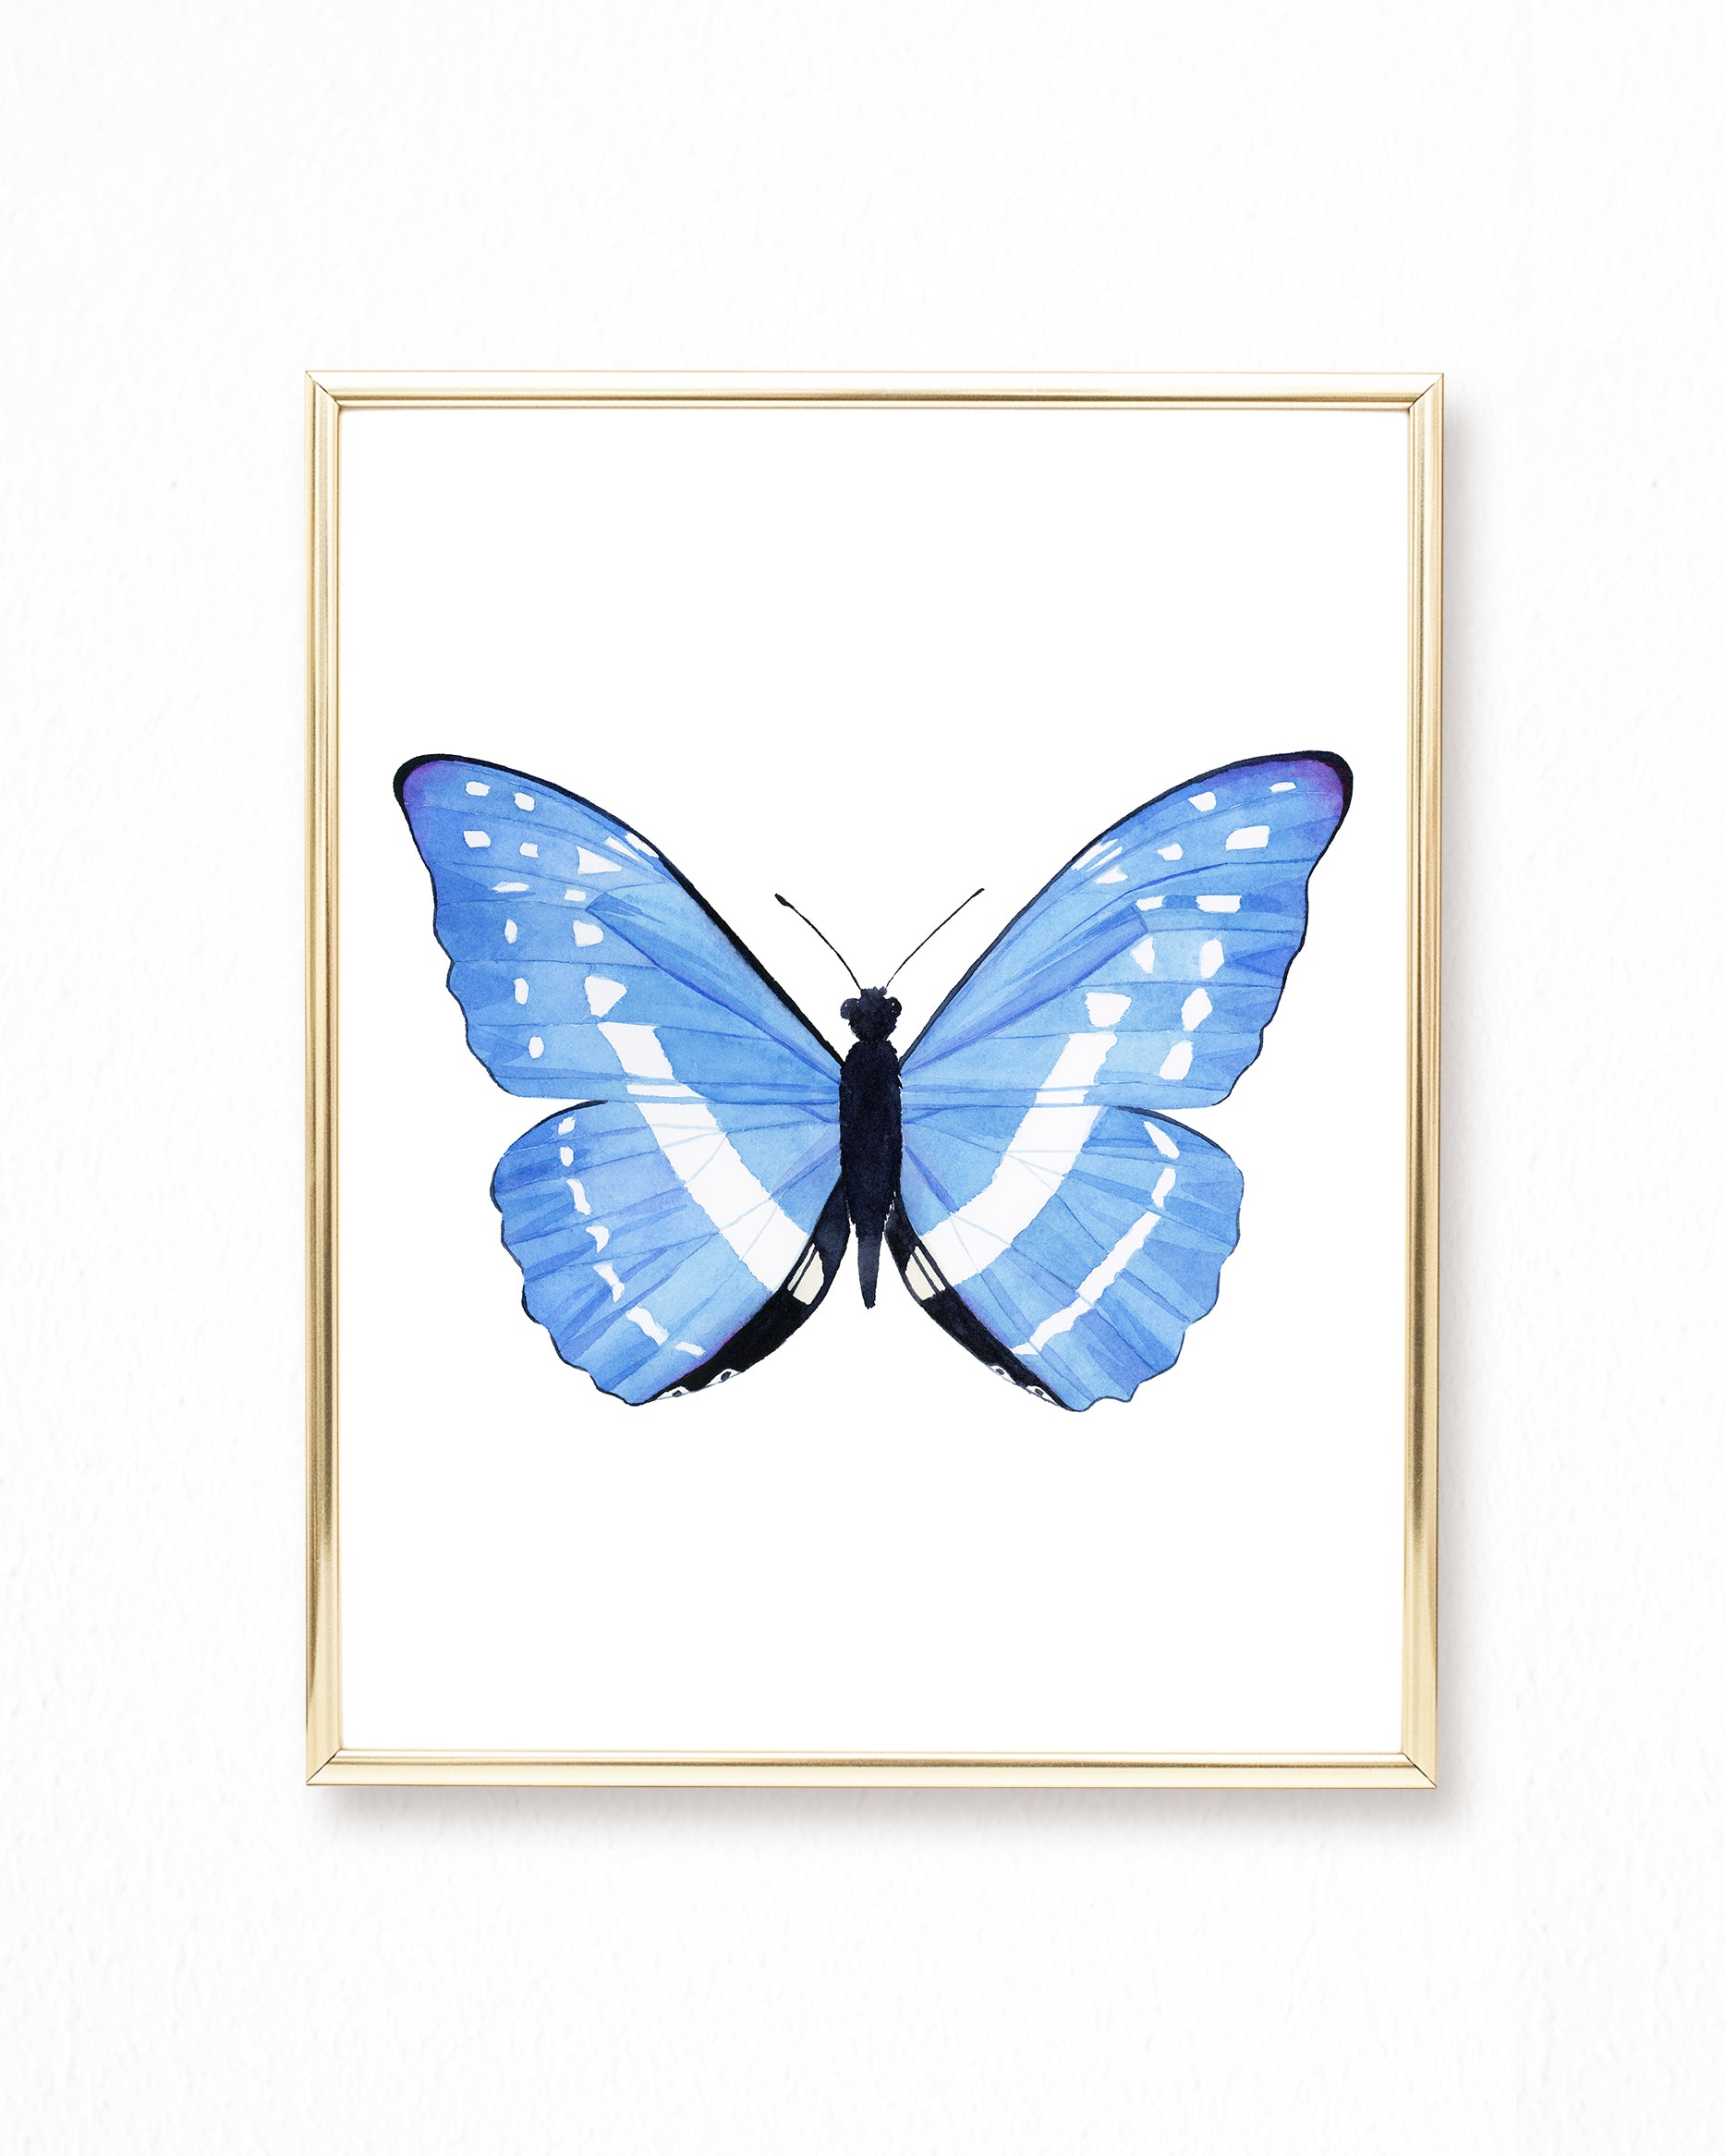 Watercolor Butterfly Paintings - Collection of 9 Art Prints